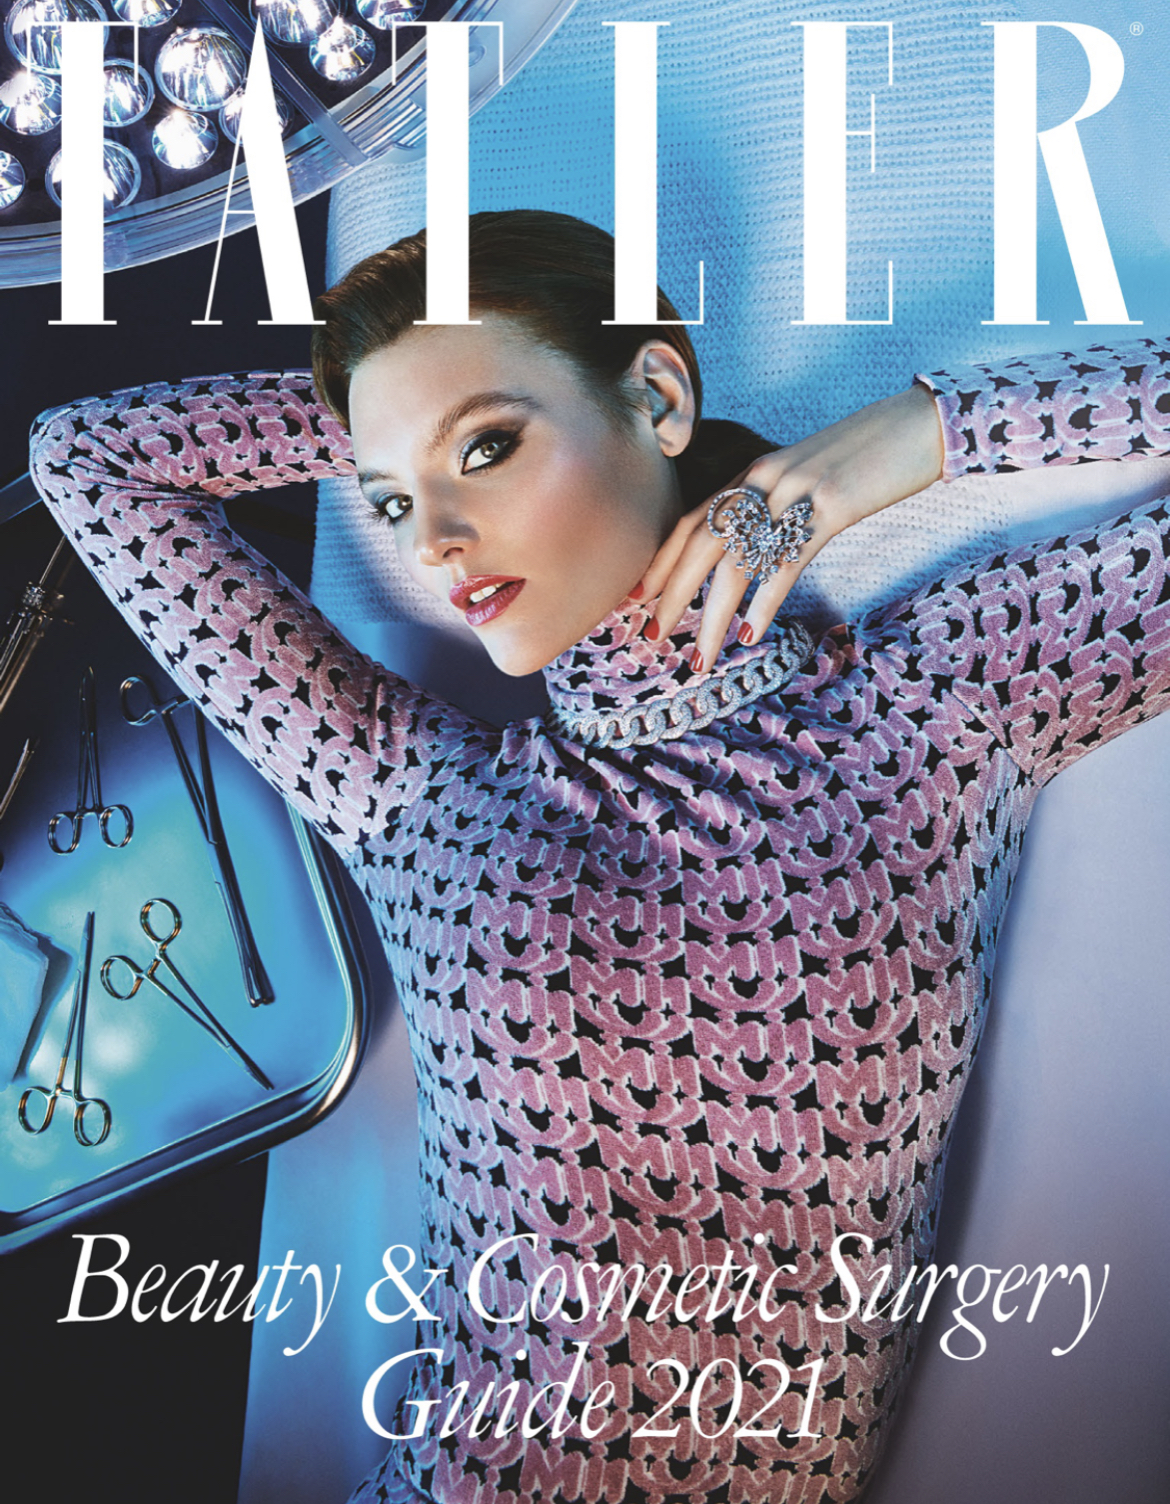 RECOGNISED FOR A SECOND YEAR! TATLER BEAUTY & COSMETIC SURGERY GUIDE 2021!